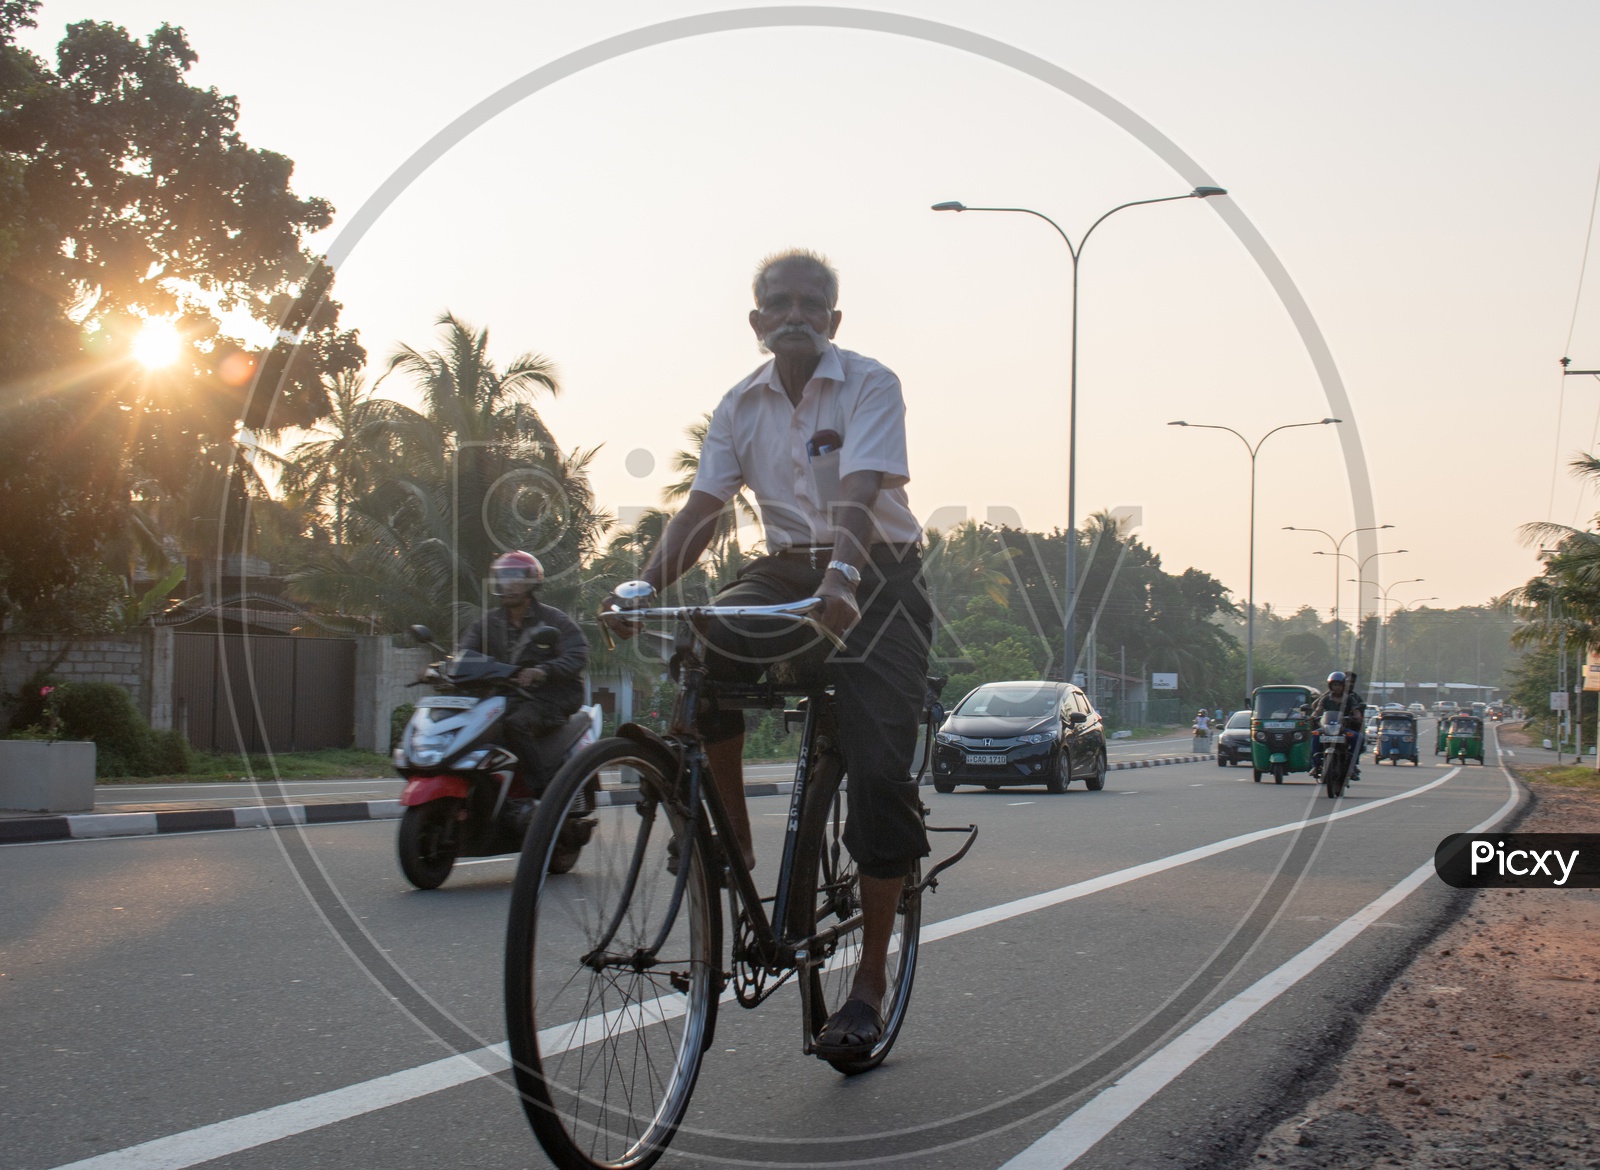 An Old Man Commuting In a Bicycle  on Roads Of Sri Lanka